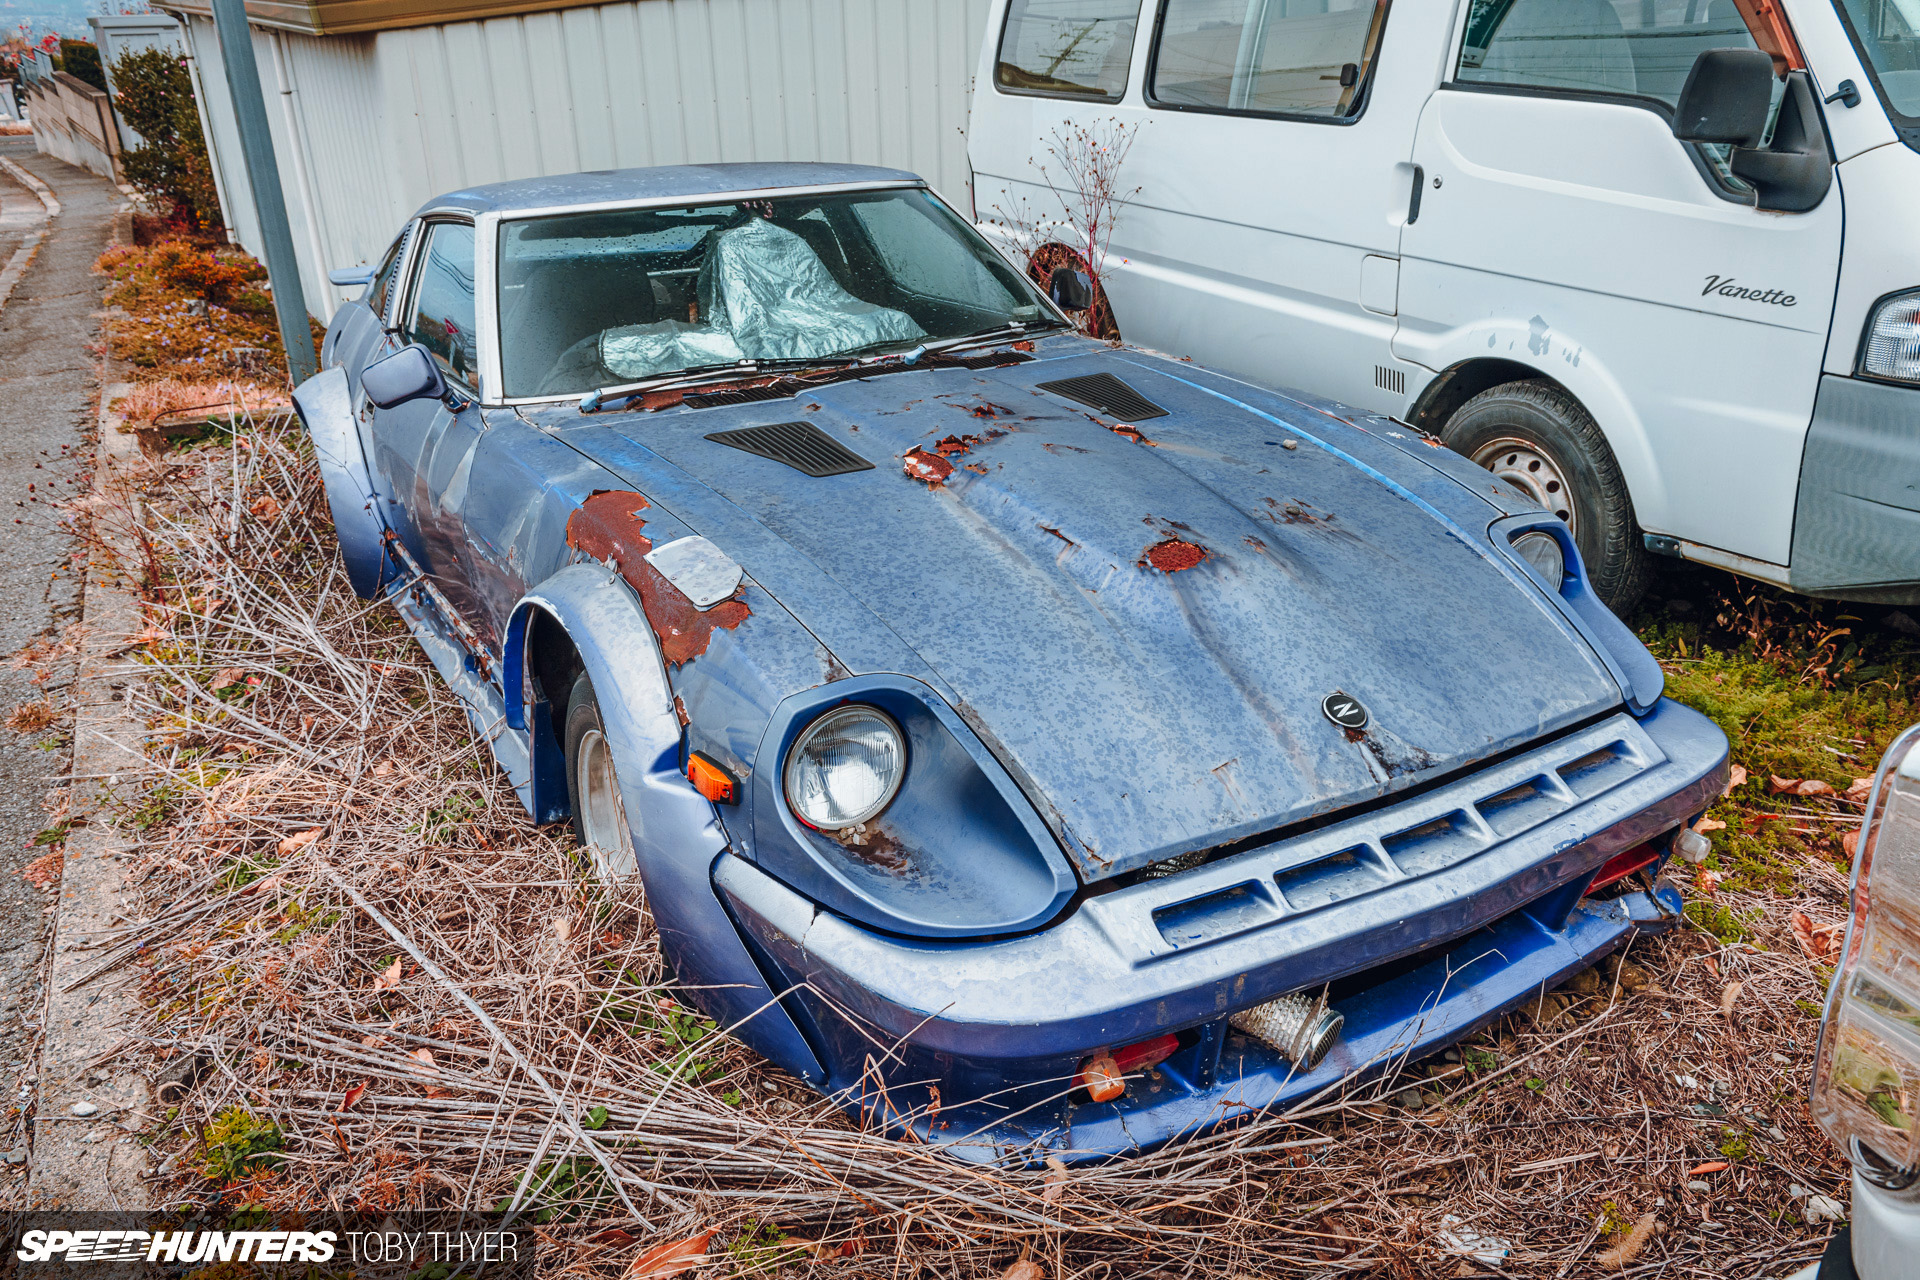 Junkhunting Japan: The Abandoned Z-Cars - Speedhunters